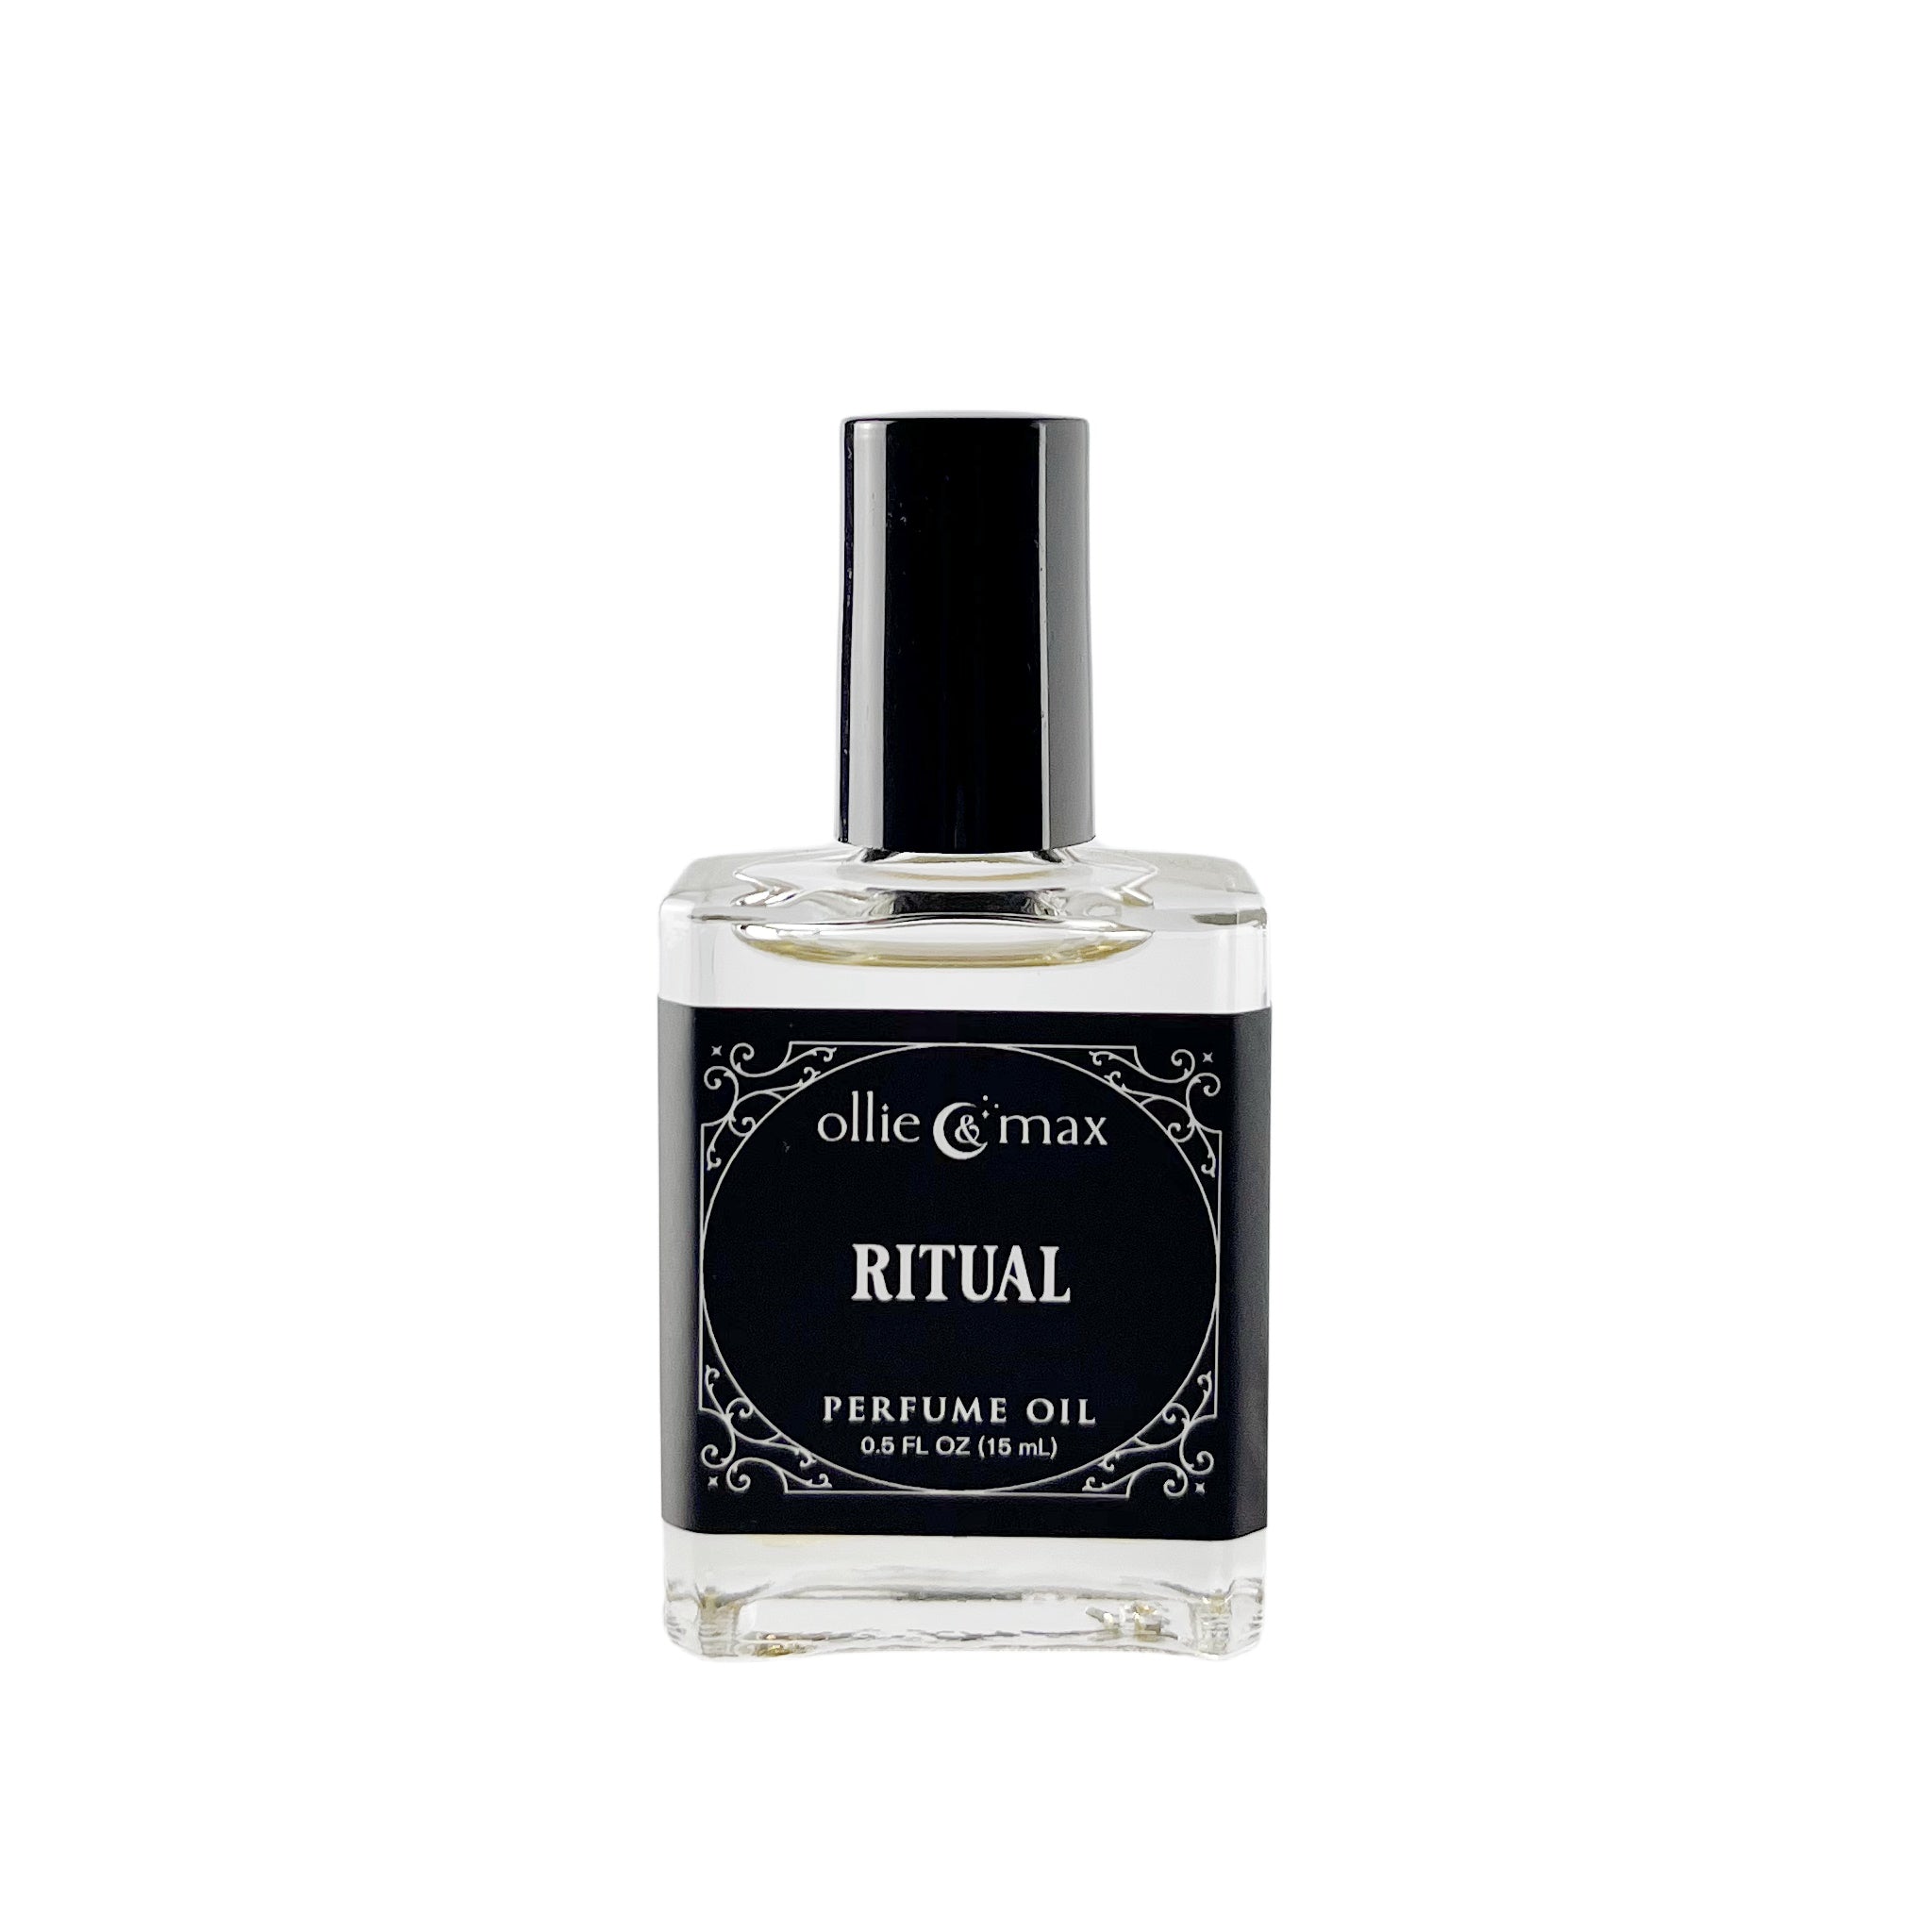 Ritual perfume, 15ml in a rectangle glass bottle with a black and silver label and black cap